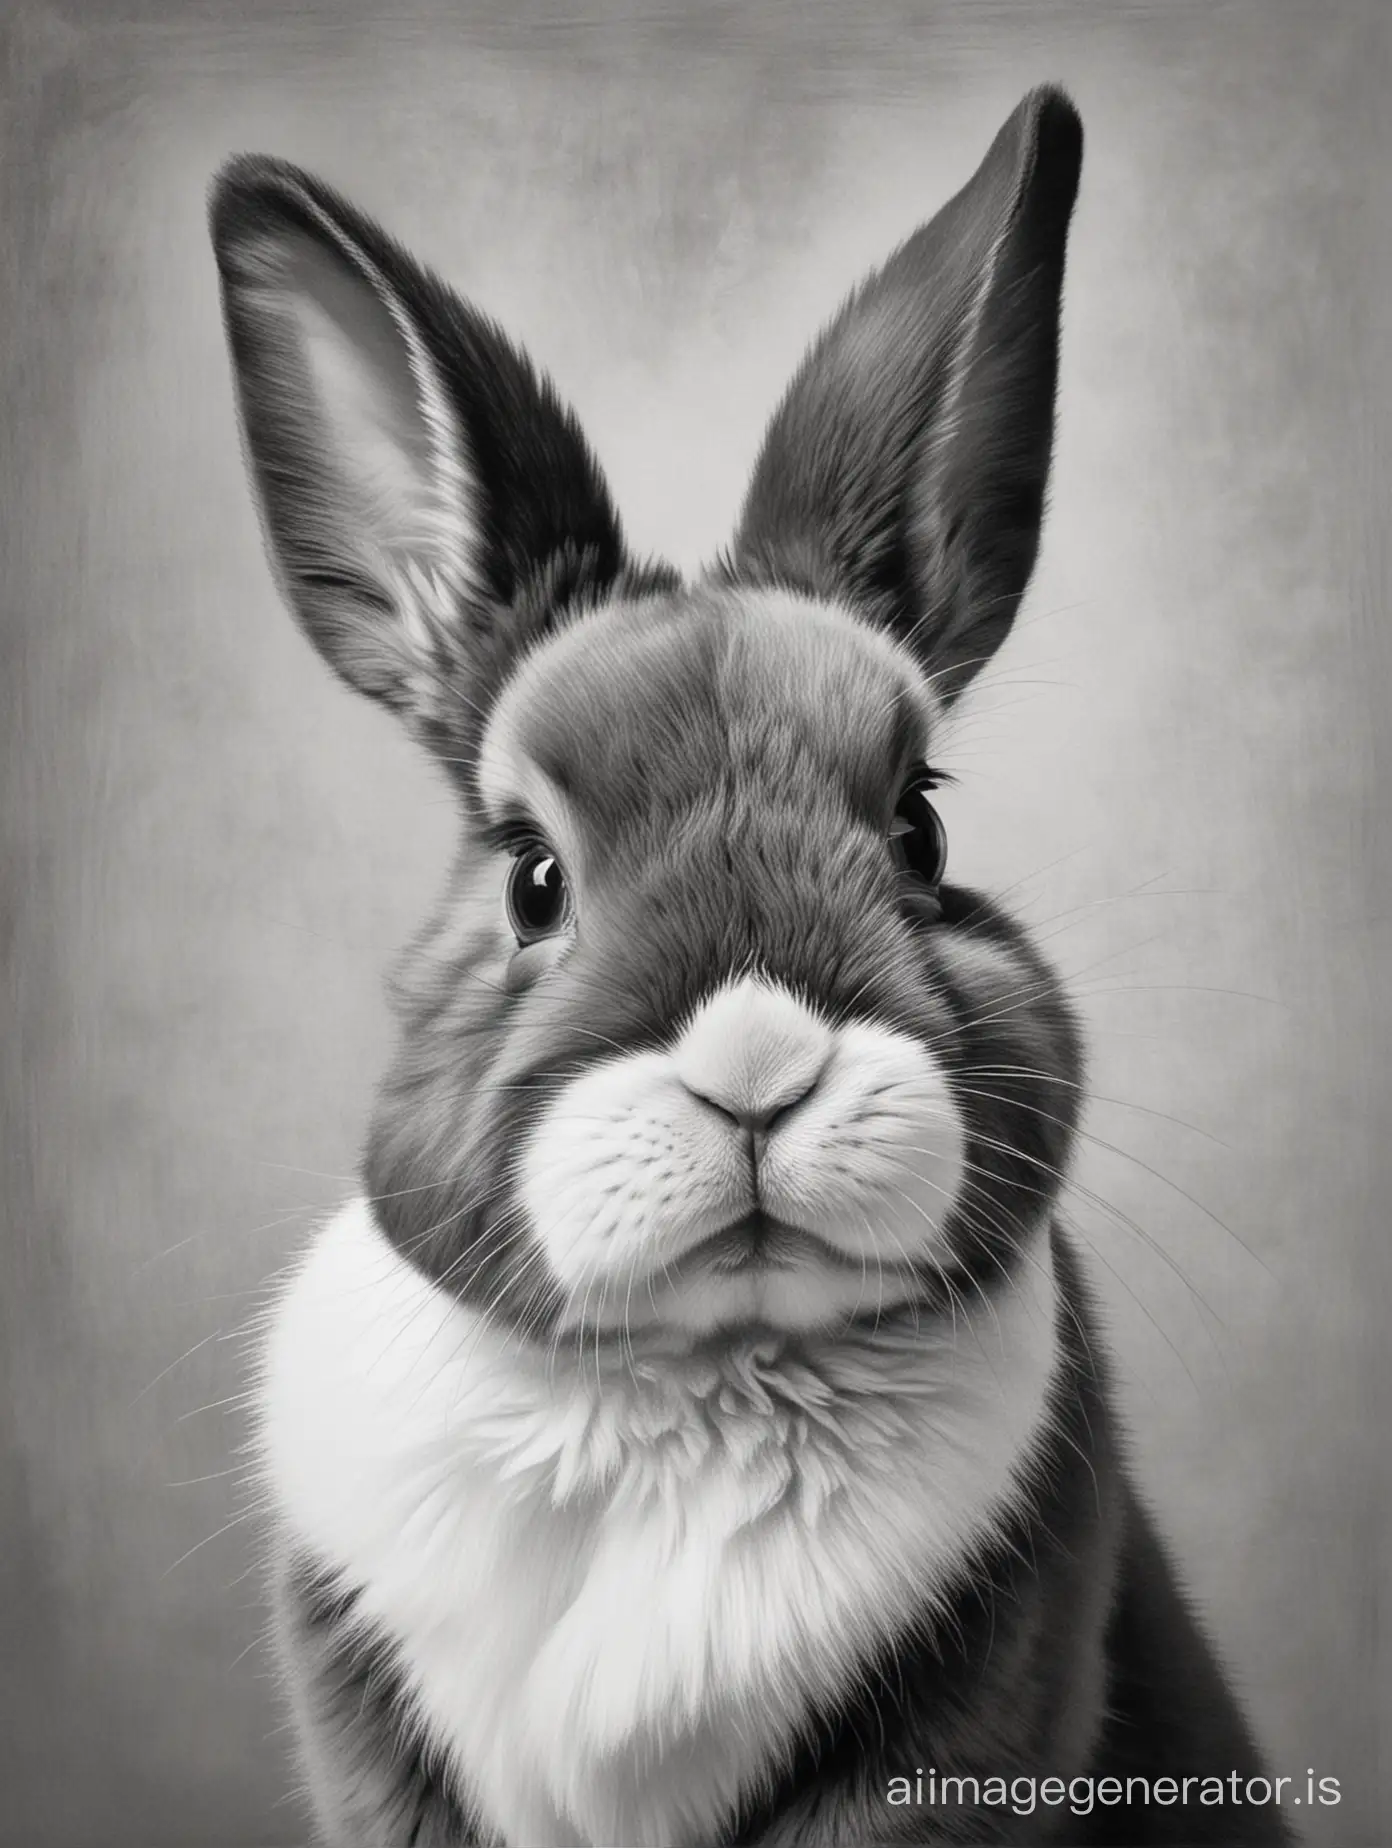 Create an artist's pencil drawing in black and white of a Netherland Dwarf rabbit bunny in Picasso's style,head sideways